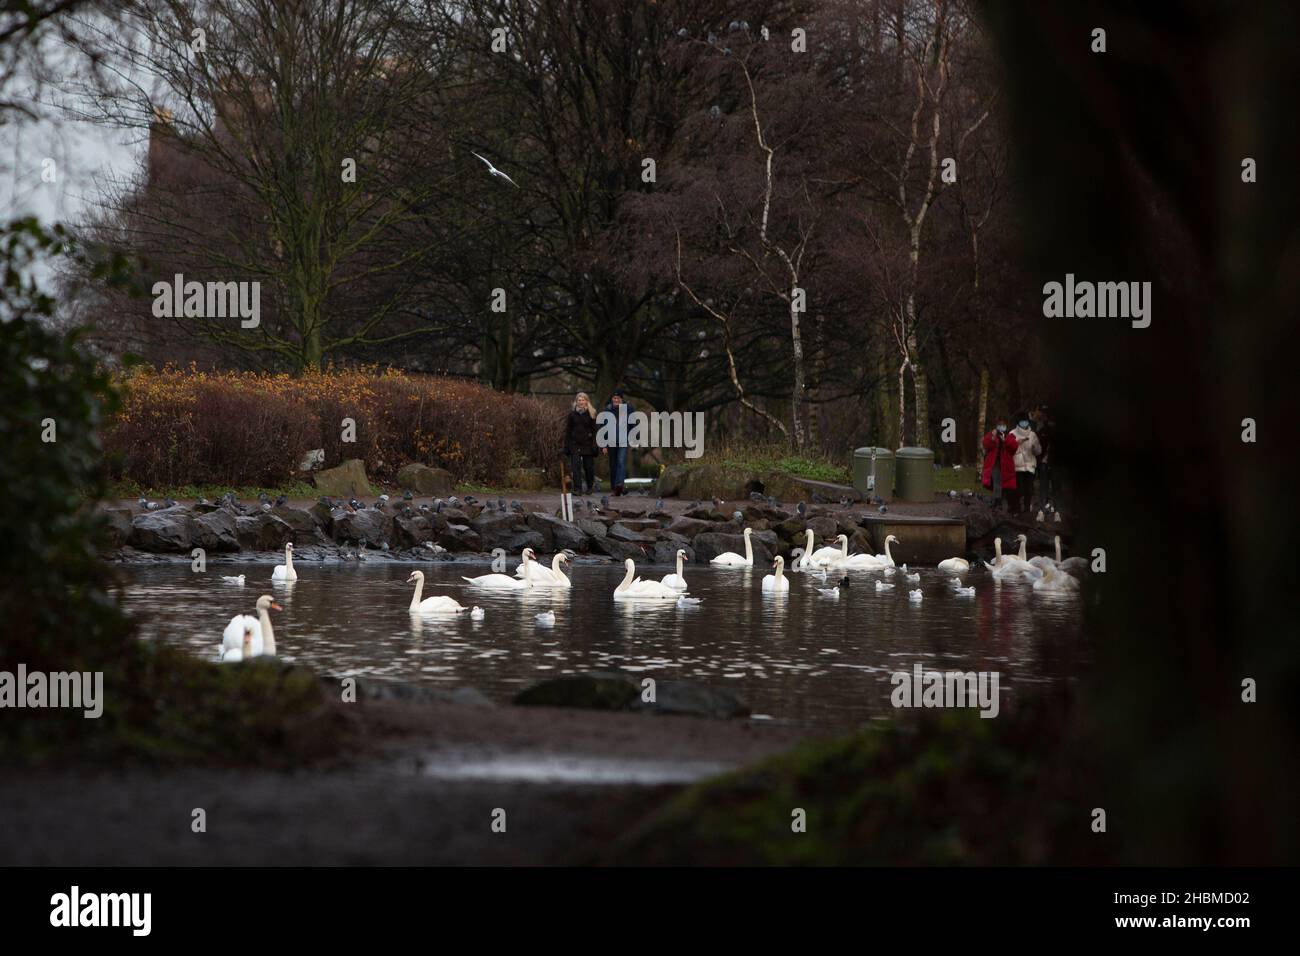 EDINBURGH, 20th December. Members of the public enjoy the outdoor in St Margarets Loch and Arthur's Seat Hill in Scotland in Edinburgh despite of Covid omicron variants. Pic Credit: Pako Mera/Alamy Live News Stock Photo